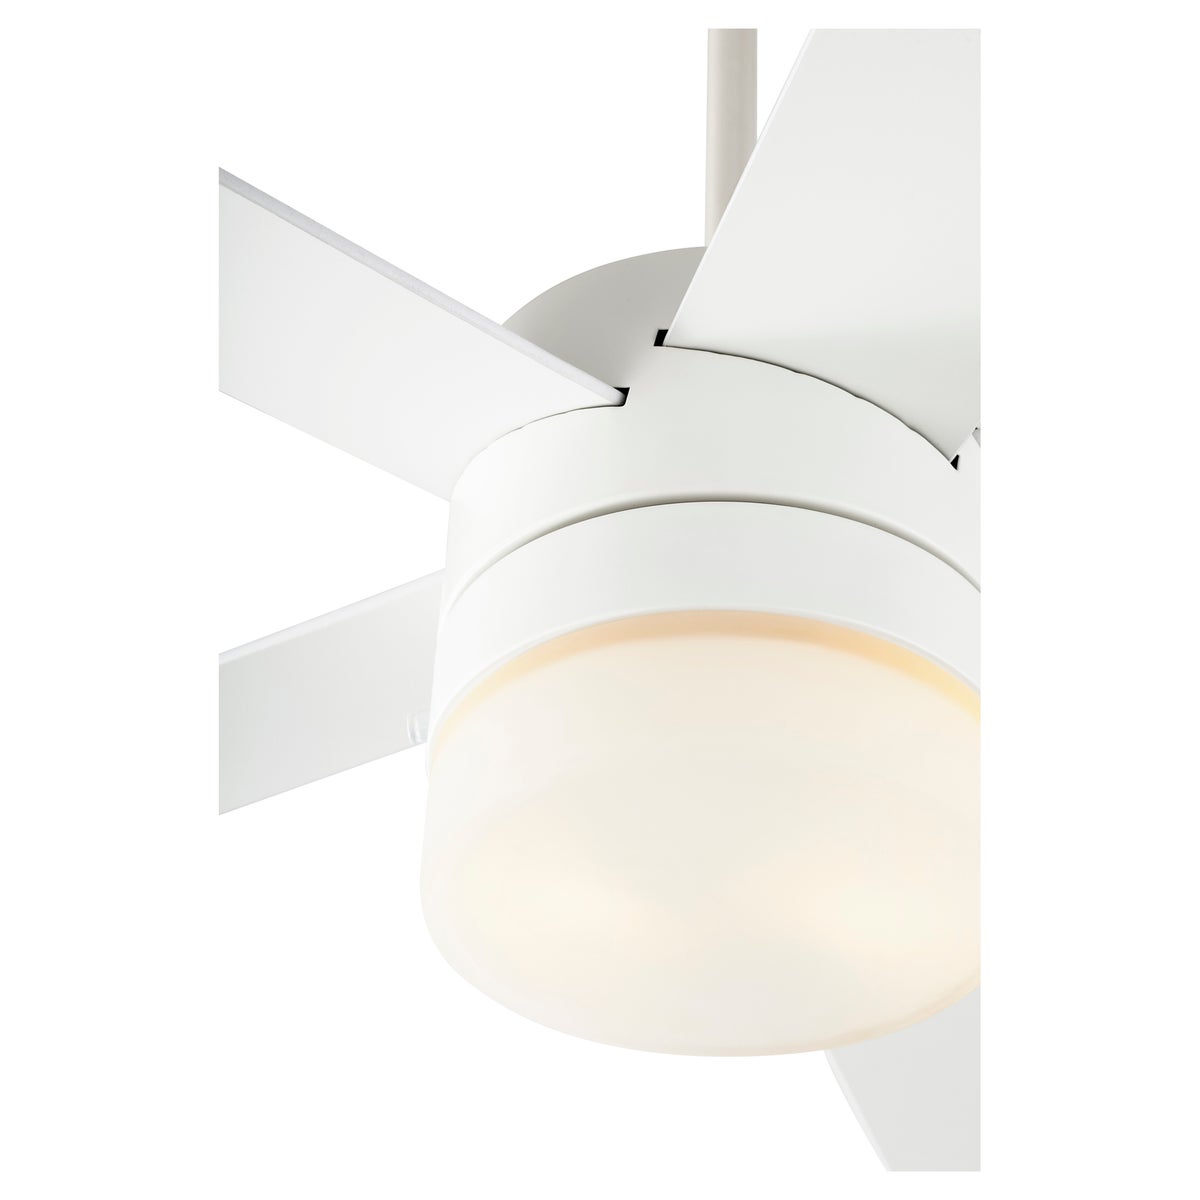 A mid century modern ceiling fan with a light fixture, featuring a clean monochrome finish on the housing, motor, and blades. The five-blade system provides efficient air circulation, while a translucent lighting shade adds an elegant touch. Perfect for delivering cooling comfort to your home.